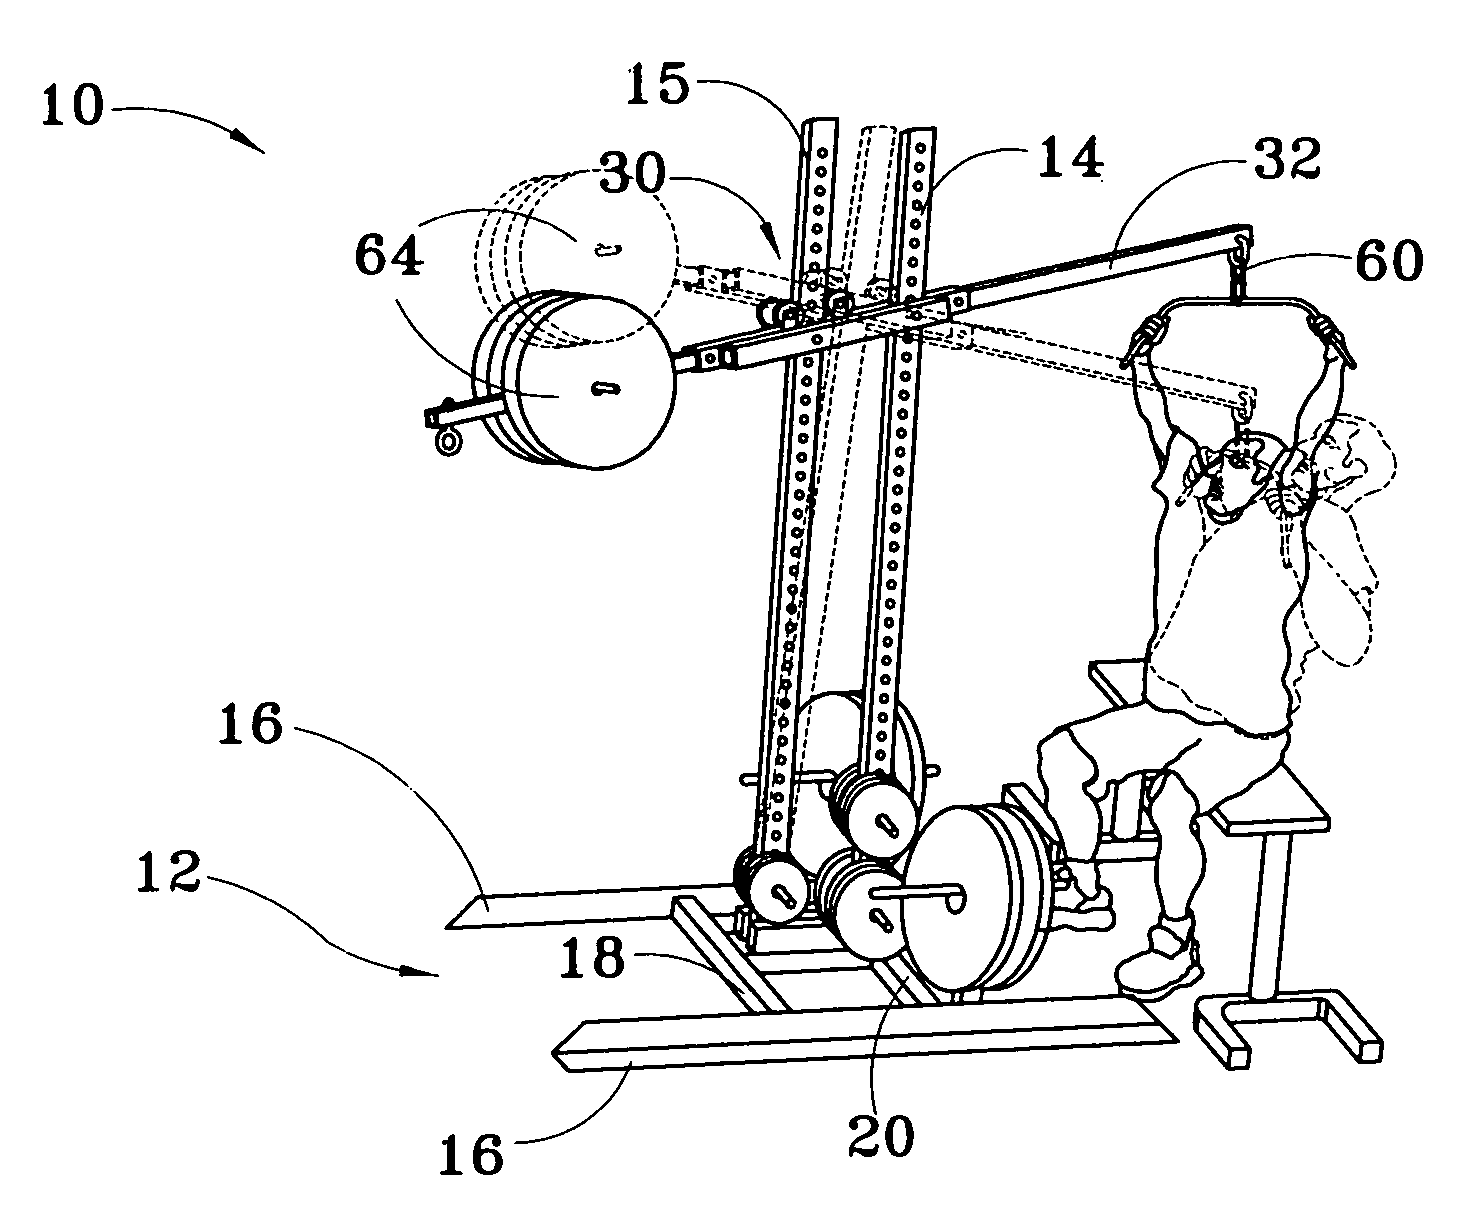 Weight exercise device